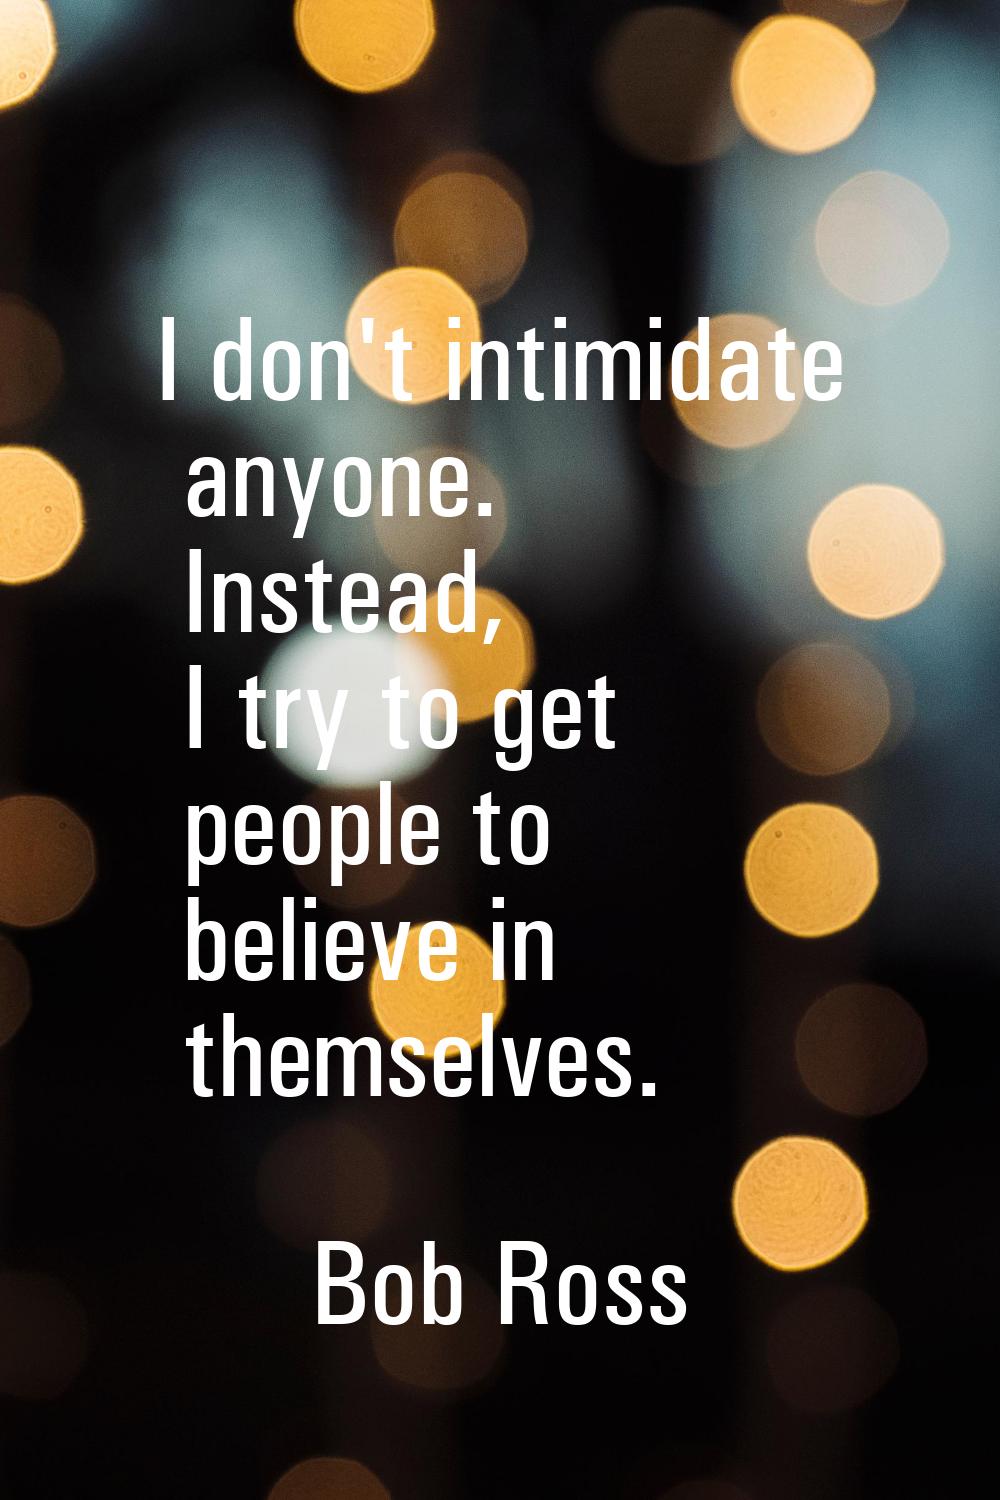 I don't intimidate anyone. Instead, I try to get people to believe in themselves.